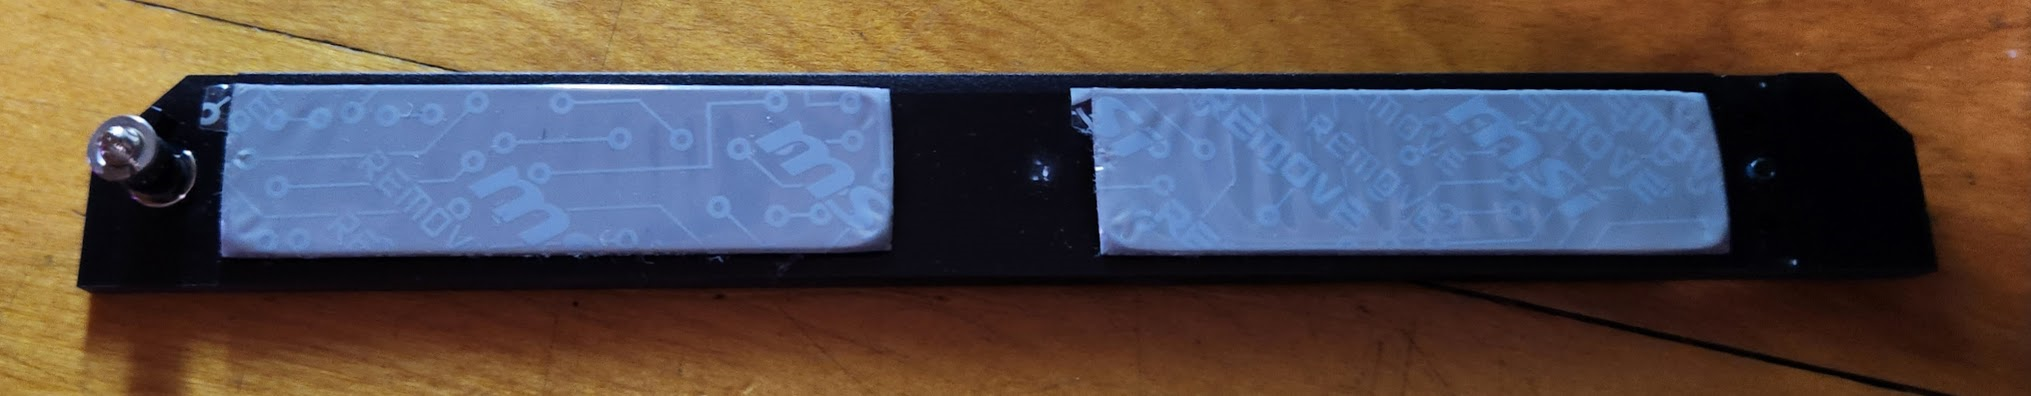 D3 & D4 cover after removal, obverse, showing heat transfer pads with plastic coverings still on